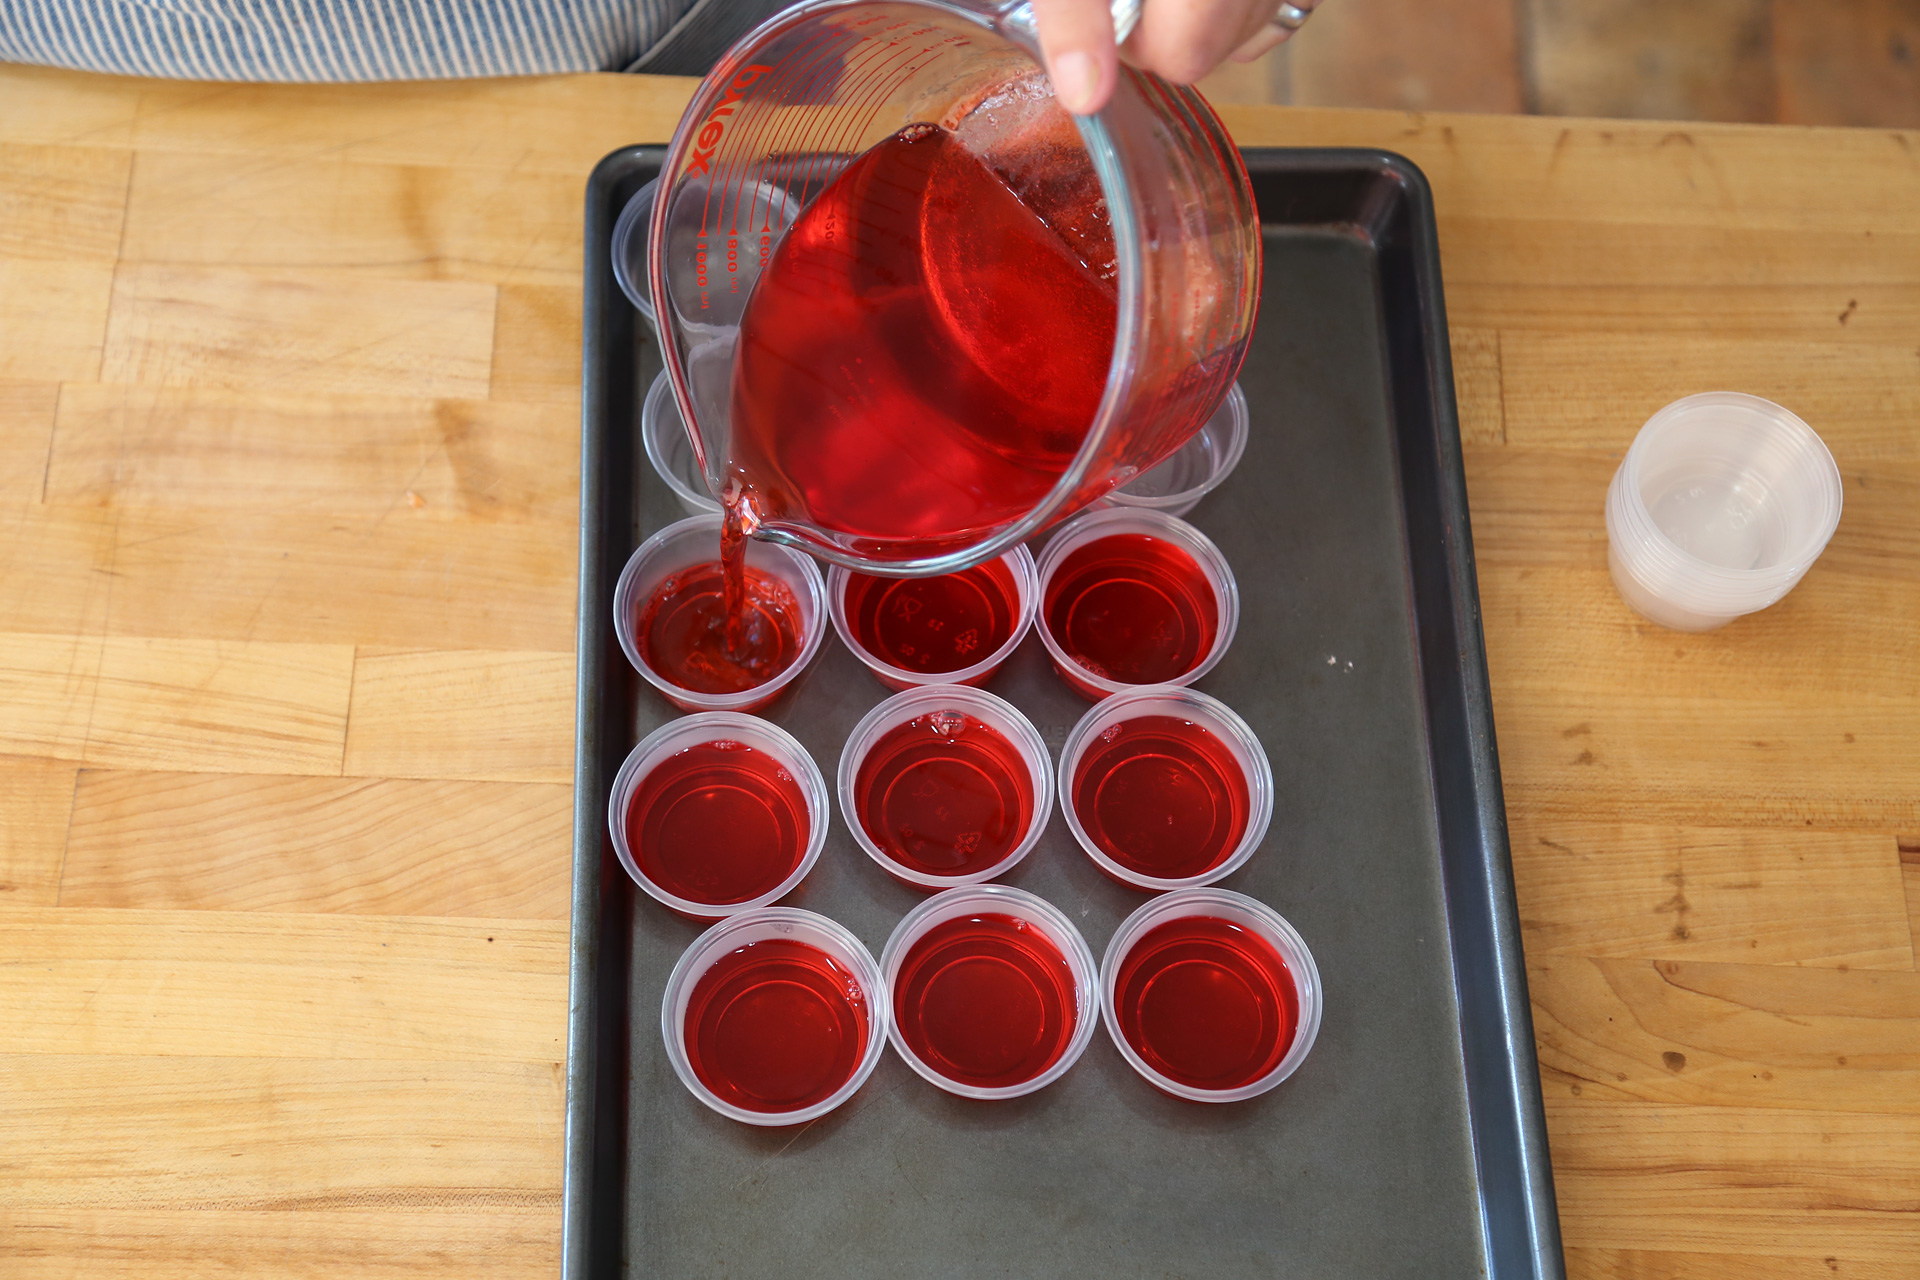 Divide between the plastic cups, filling them 3/4 full. Place on a baking sheet and refrigerate until firm, about 1 hour.